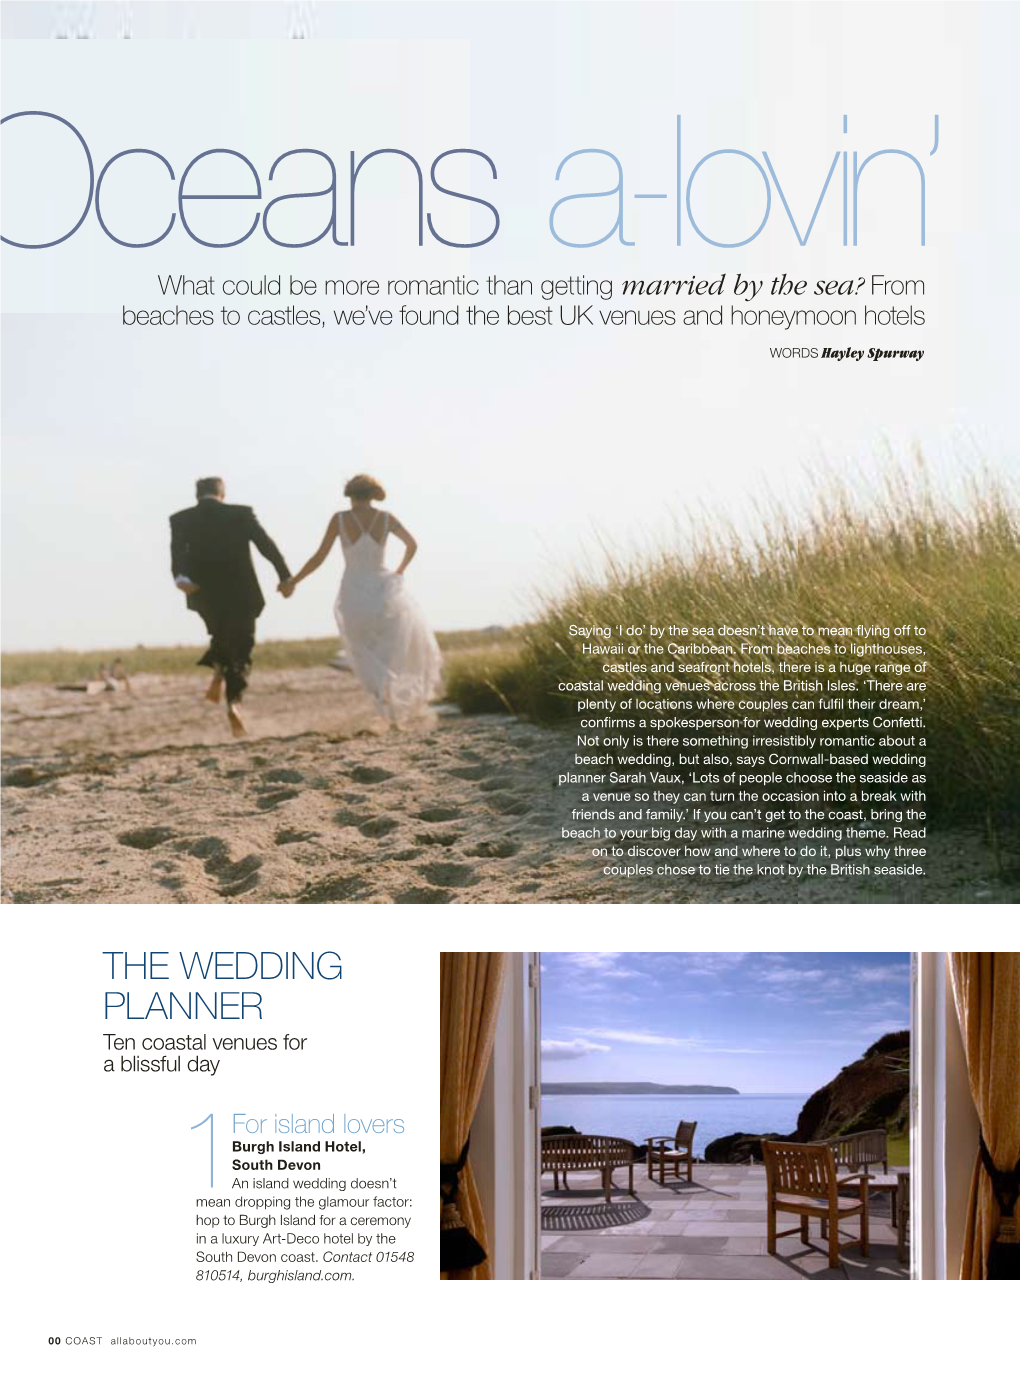 The Wedding Planner Ten Coastal Venues for a Blissful Day